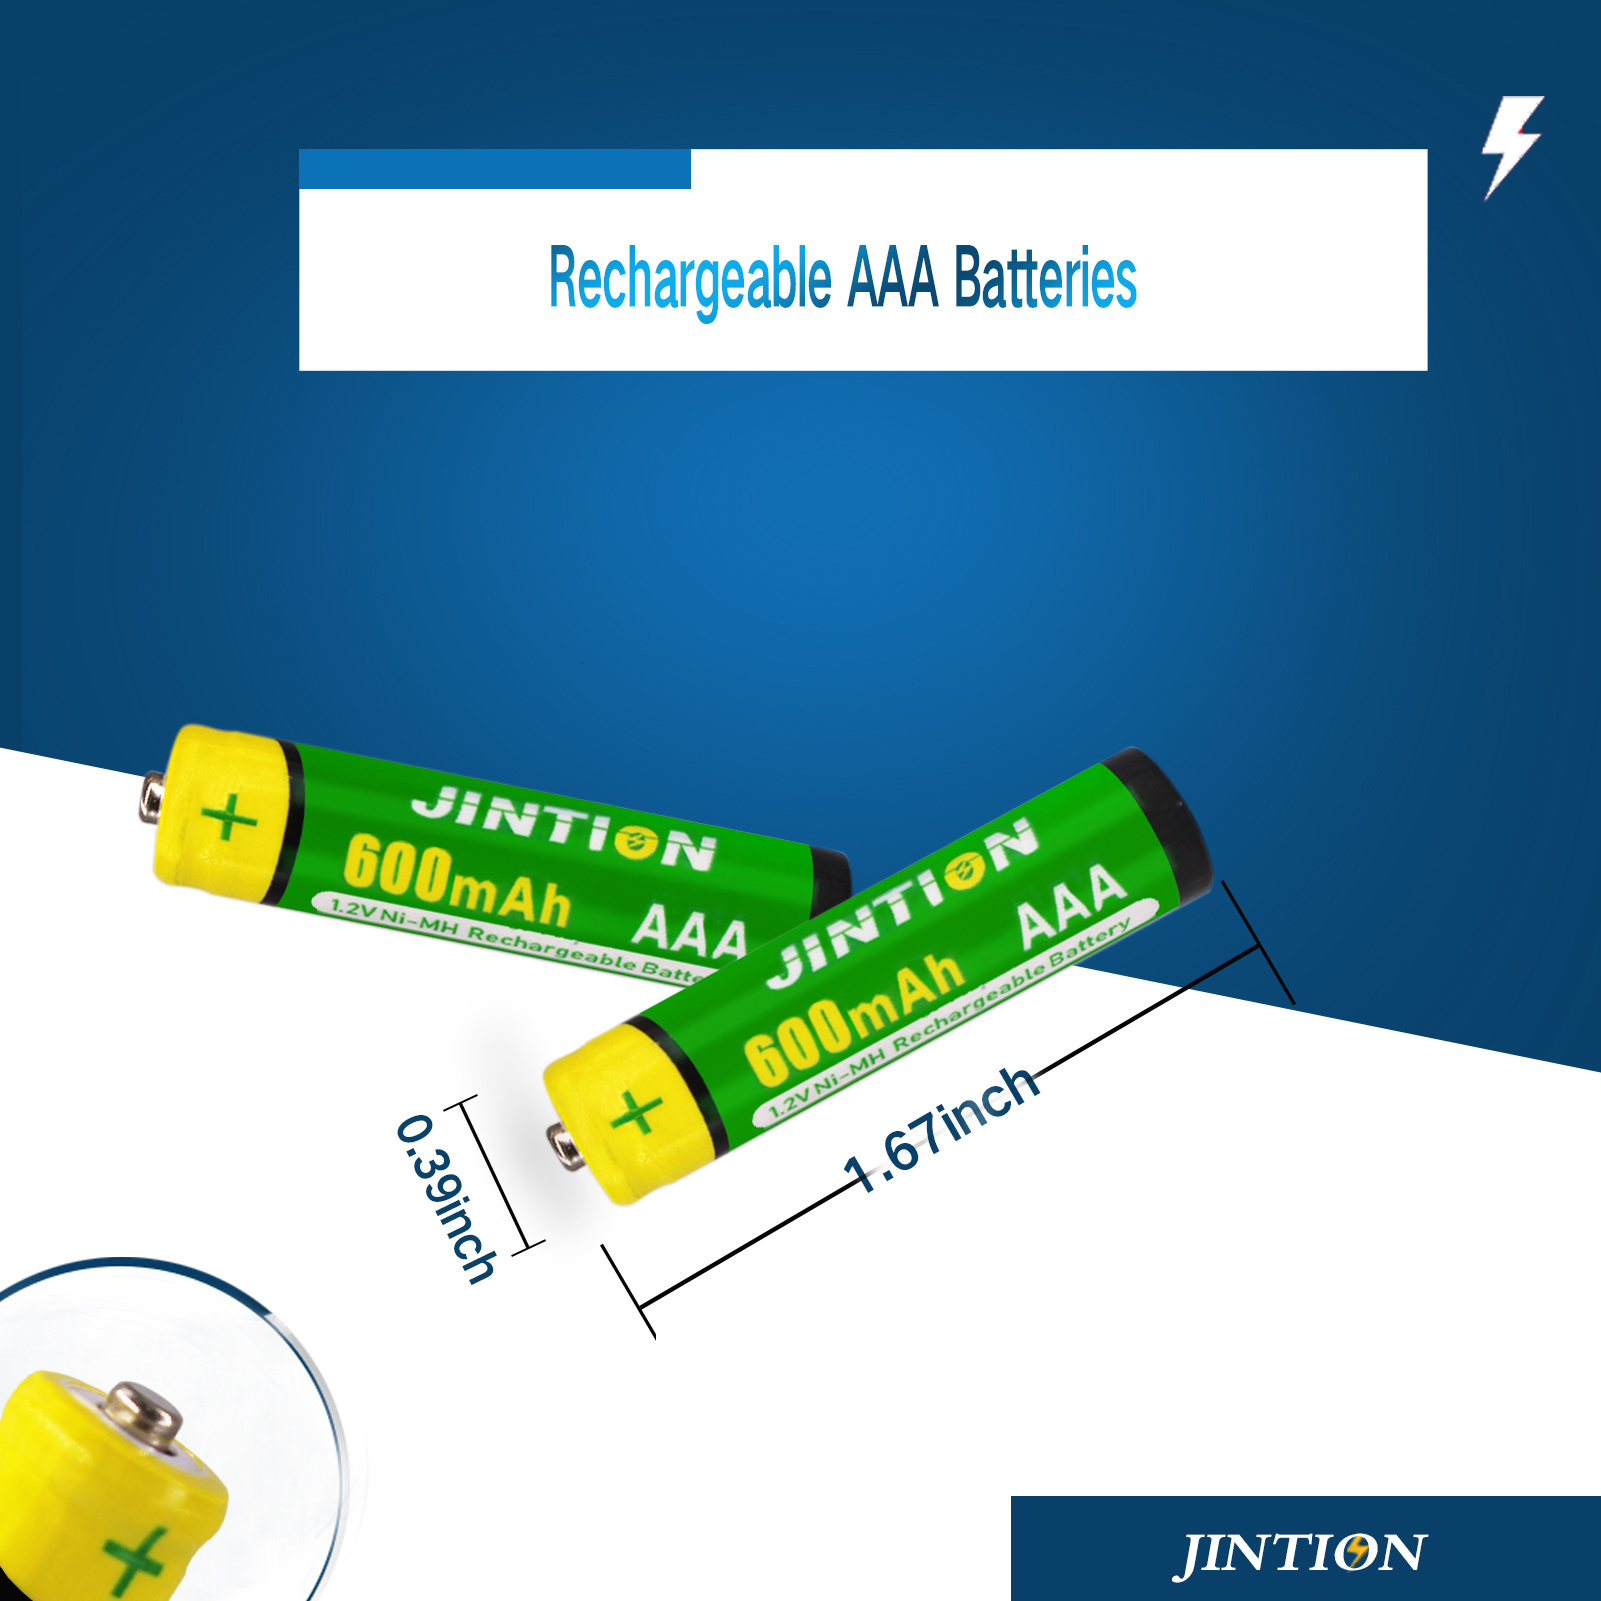 JINTION NiMh AAA 600mAh 1.2V rechargeable battery AAA rechargeable batteries Blister package